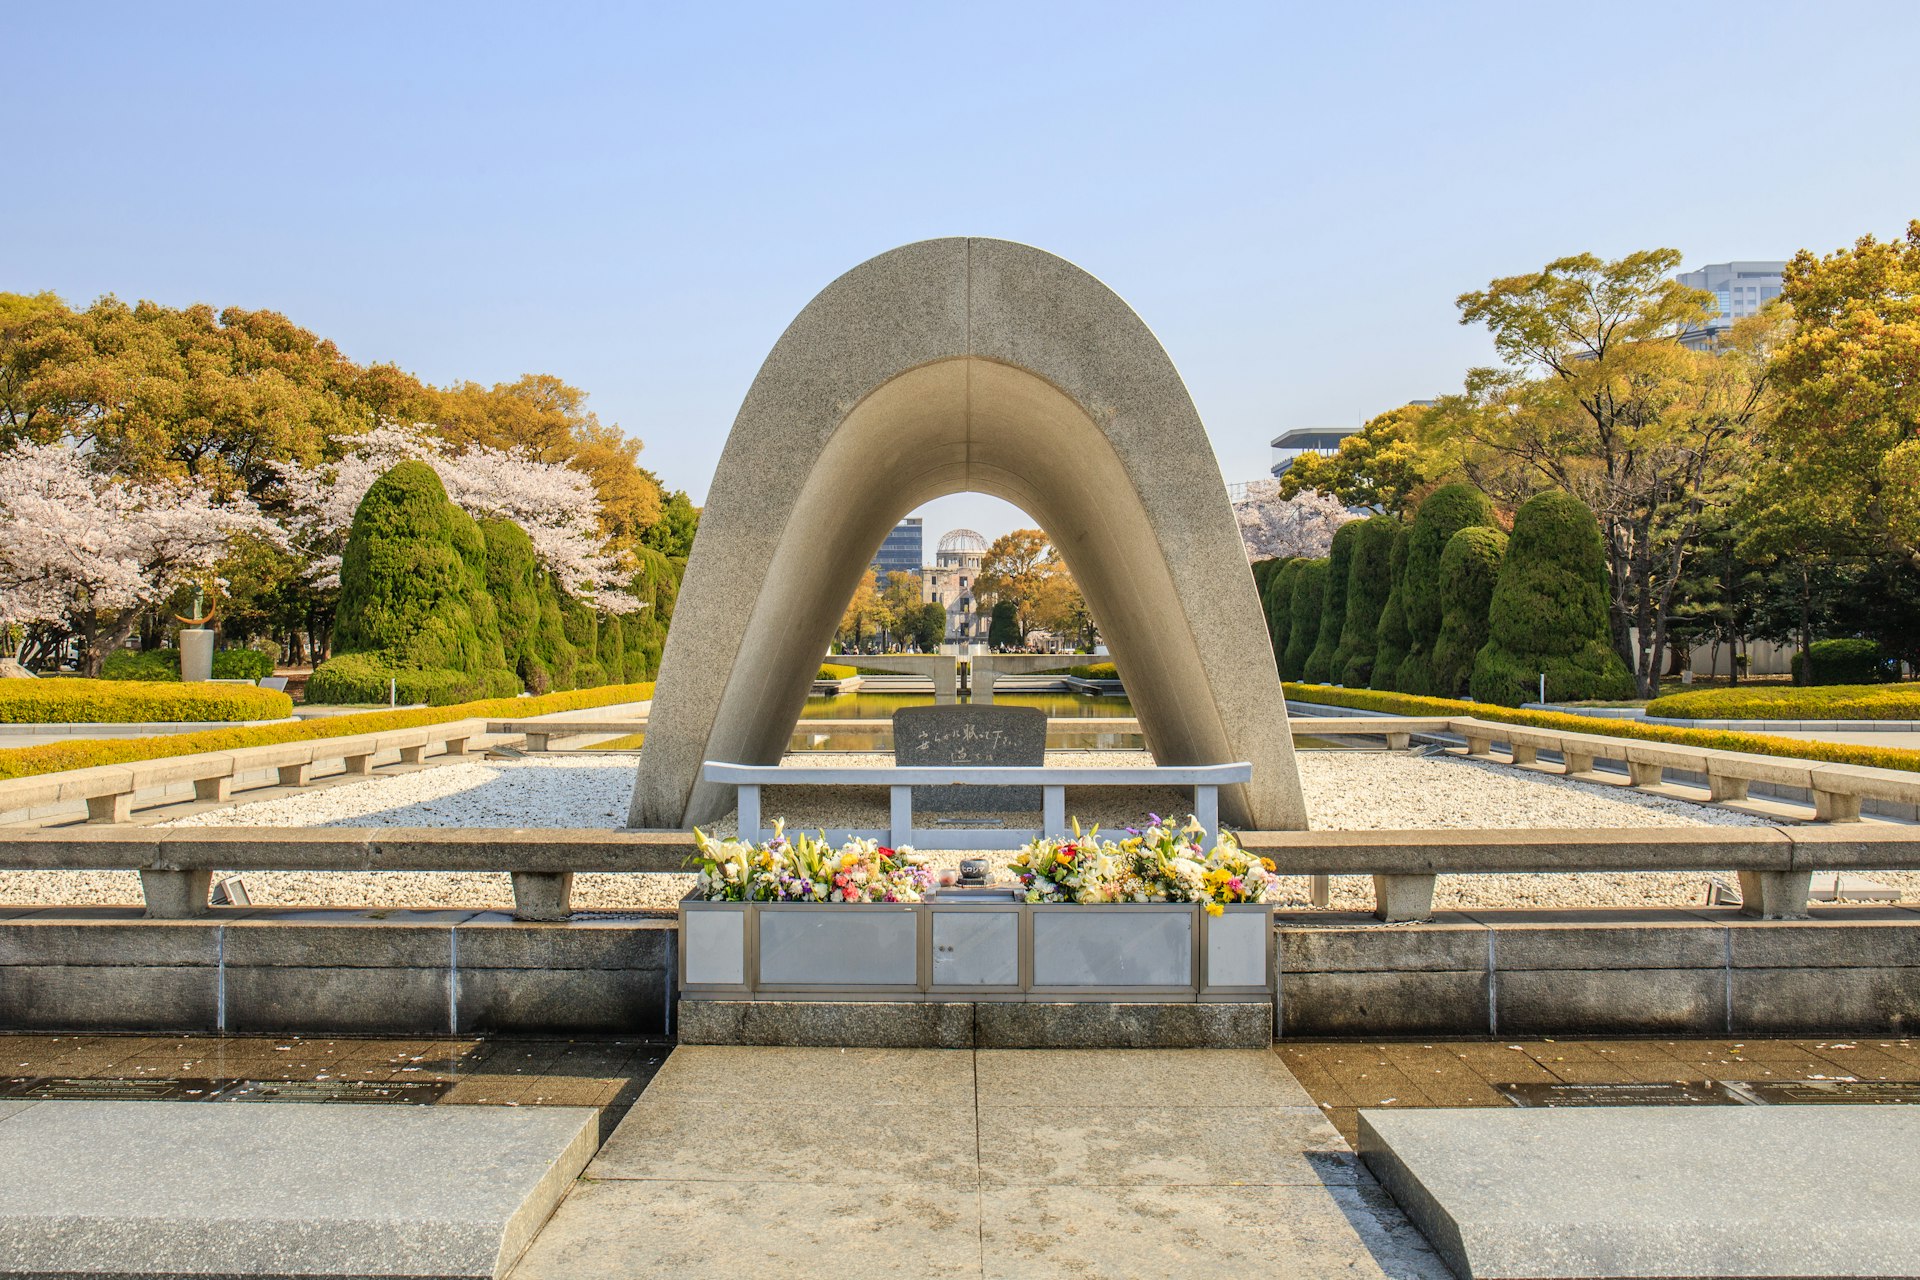 The Memorial Cenotaph at Hiroshima Peace Memorial Park. The cenotaph is a white, smooth monument in a half oval shape.